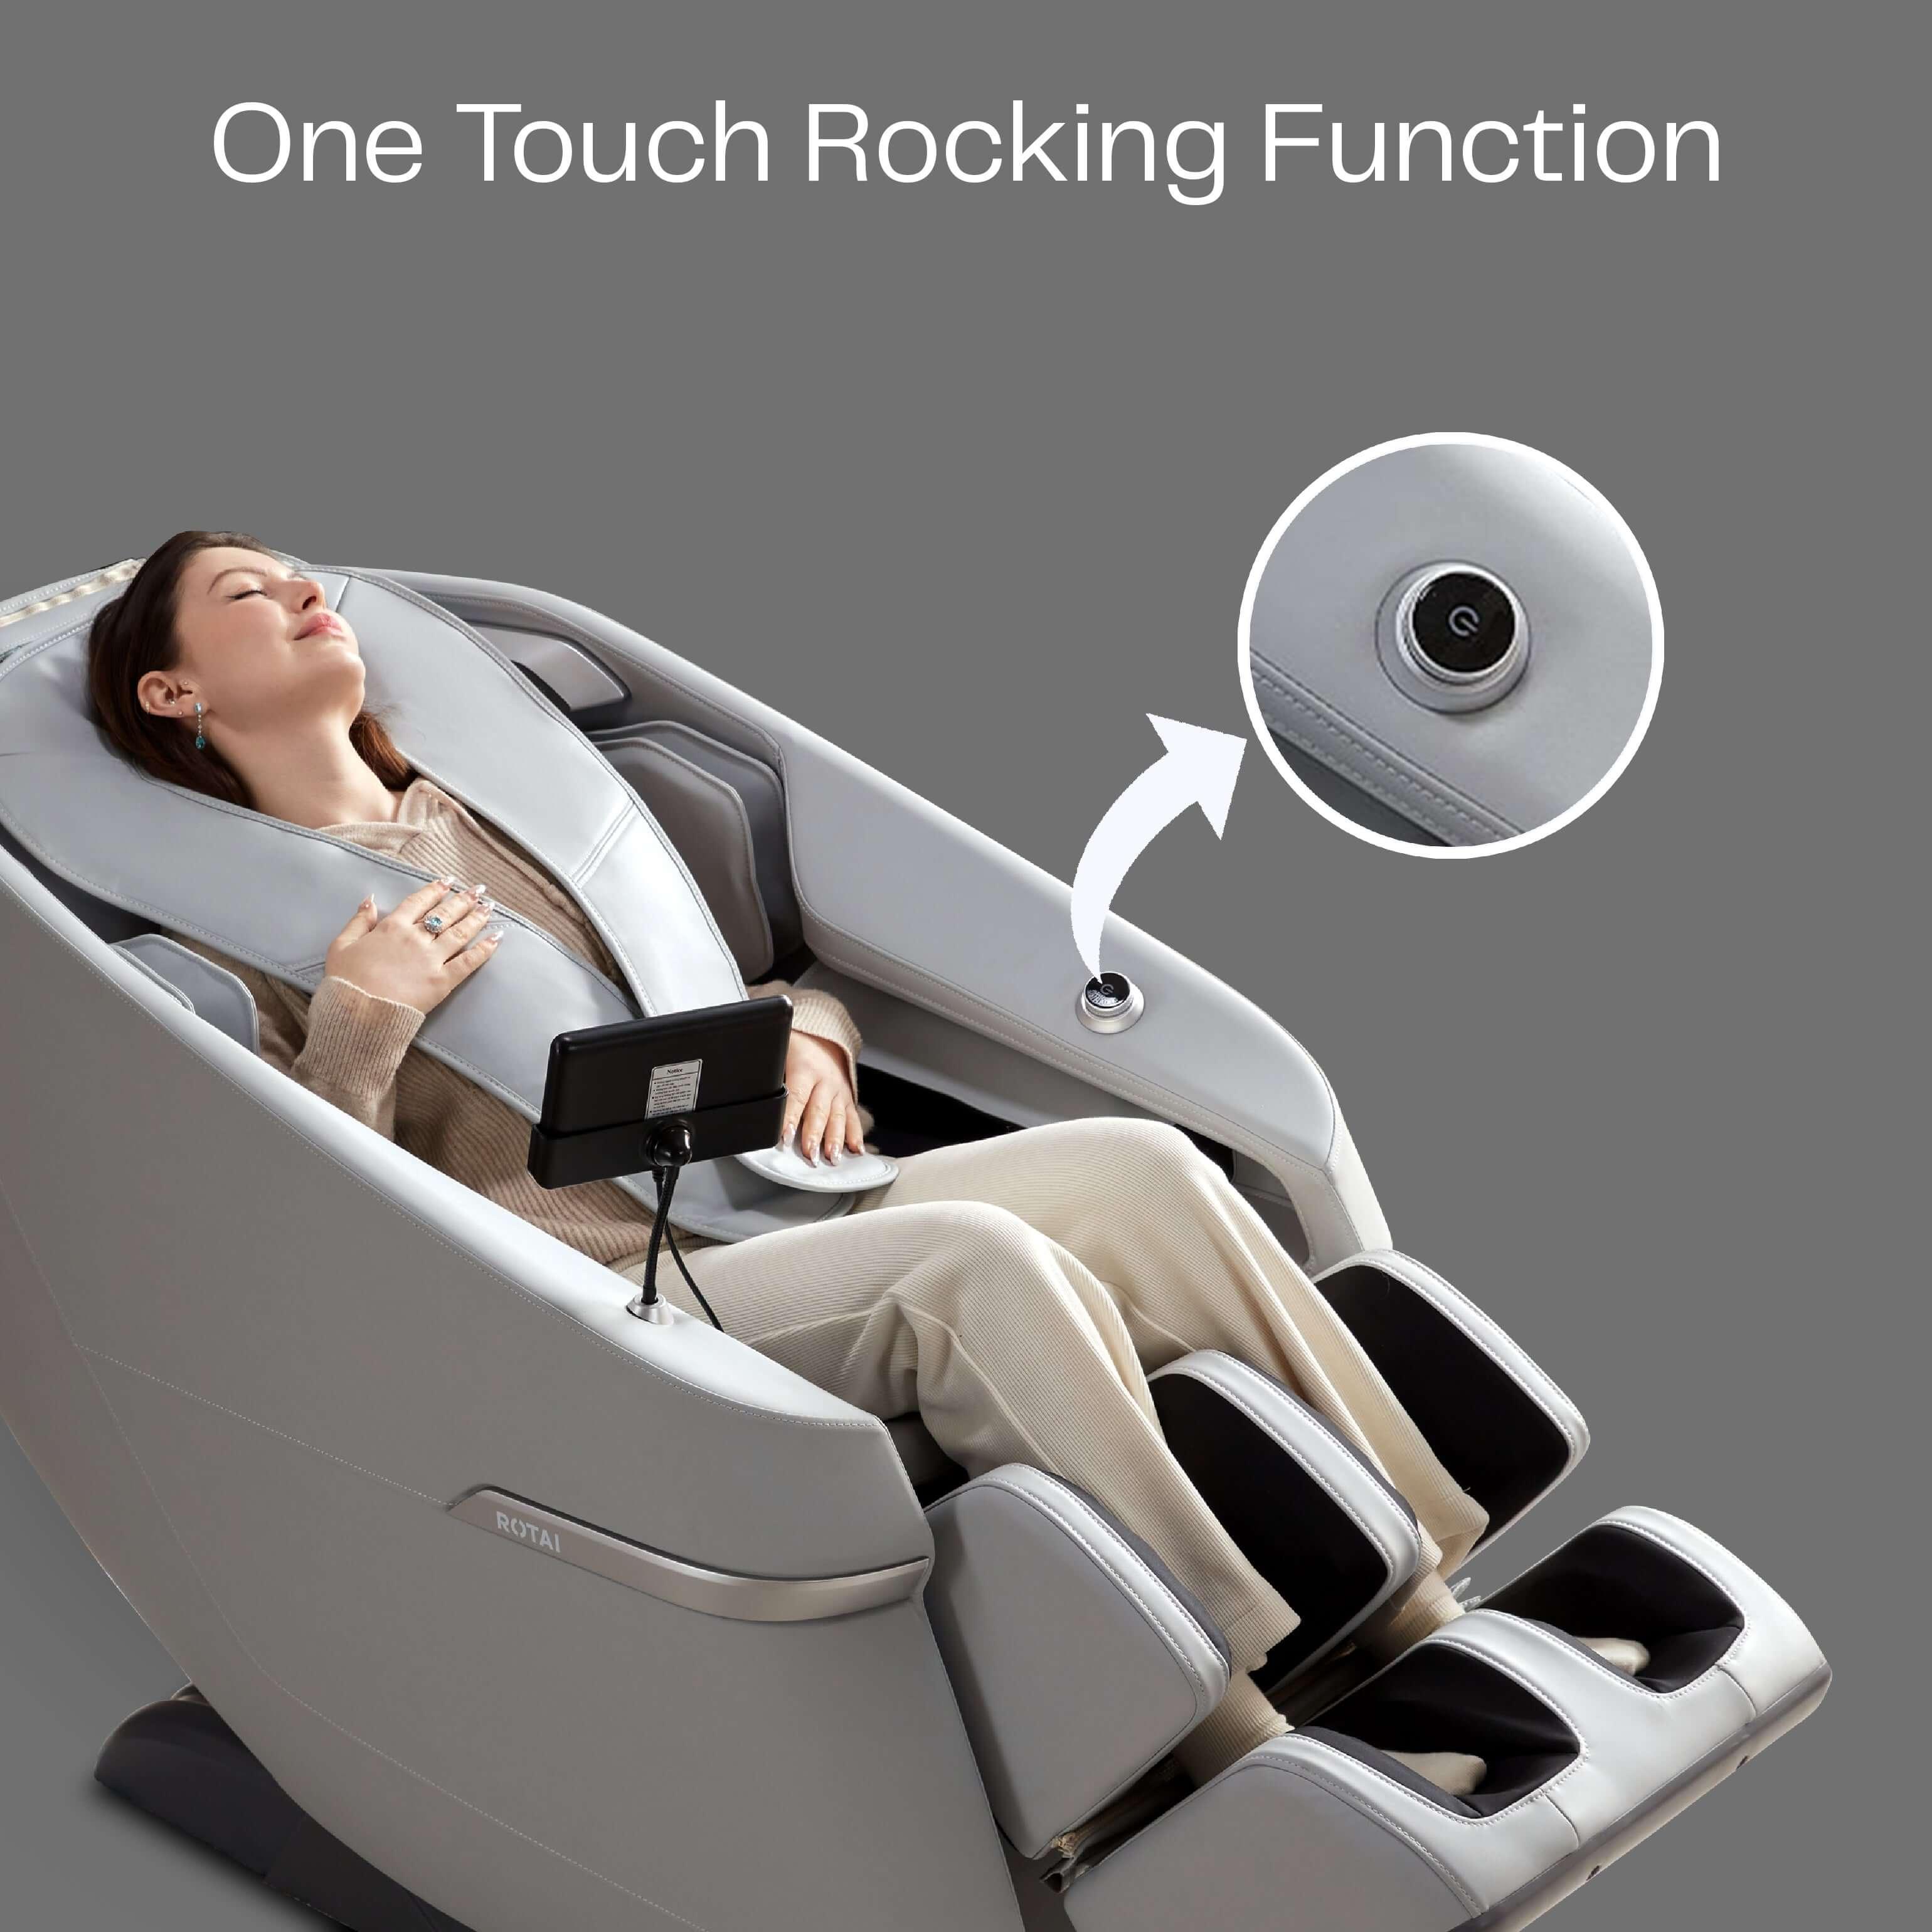 Woman relaxing in Ekanite Massage Chair with foot massager and one-touch rocking function, best massage chair in UAE, Dubai, كرسي استرخاء, كرسي مساج كهربائي